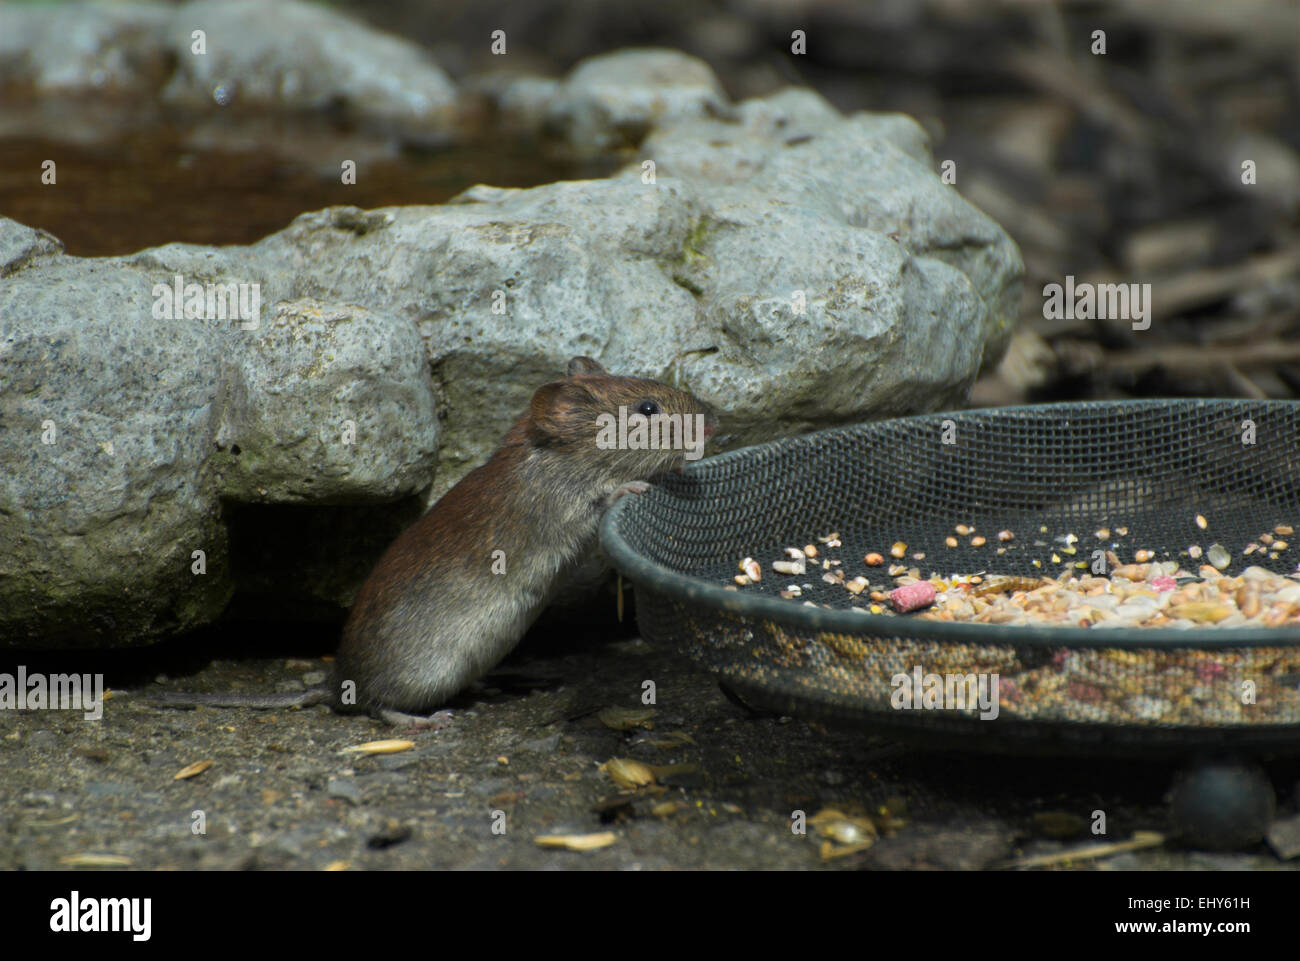 A bank vole helps itself to food from a bird ground feeder Stock Photo